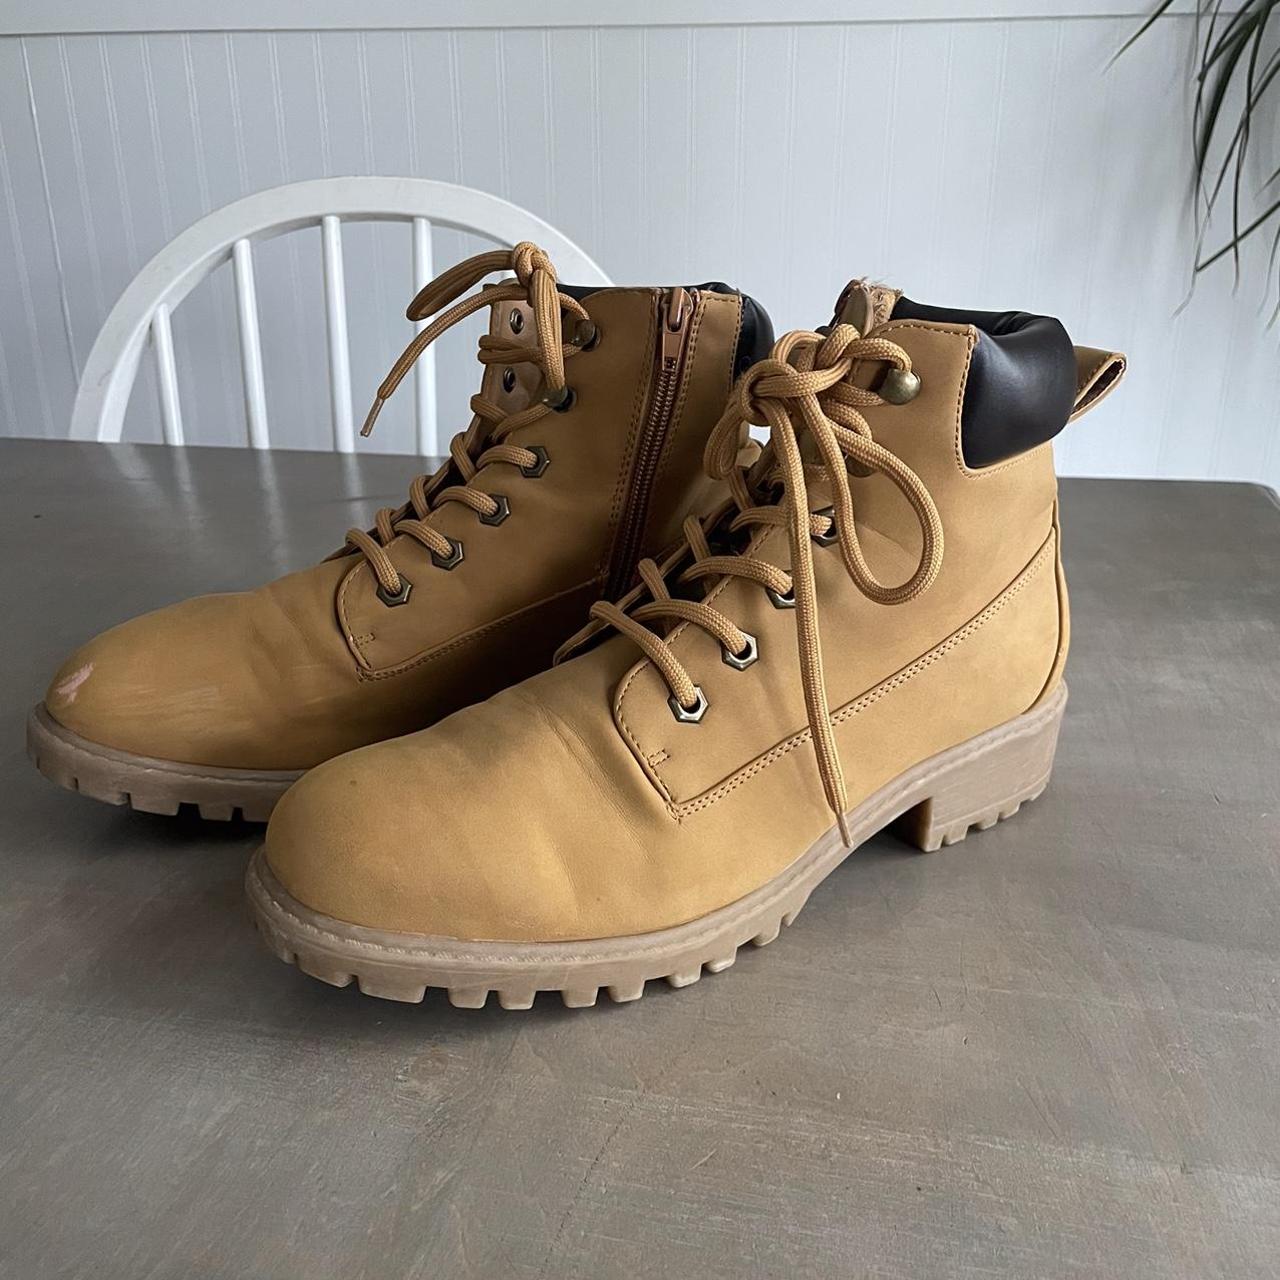 Offbrand timberland boots with a small scuff on the... - Depop